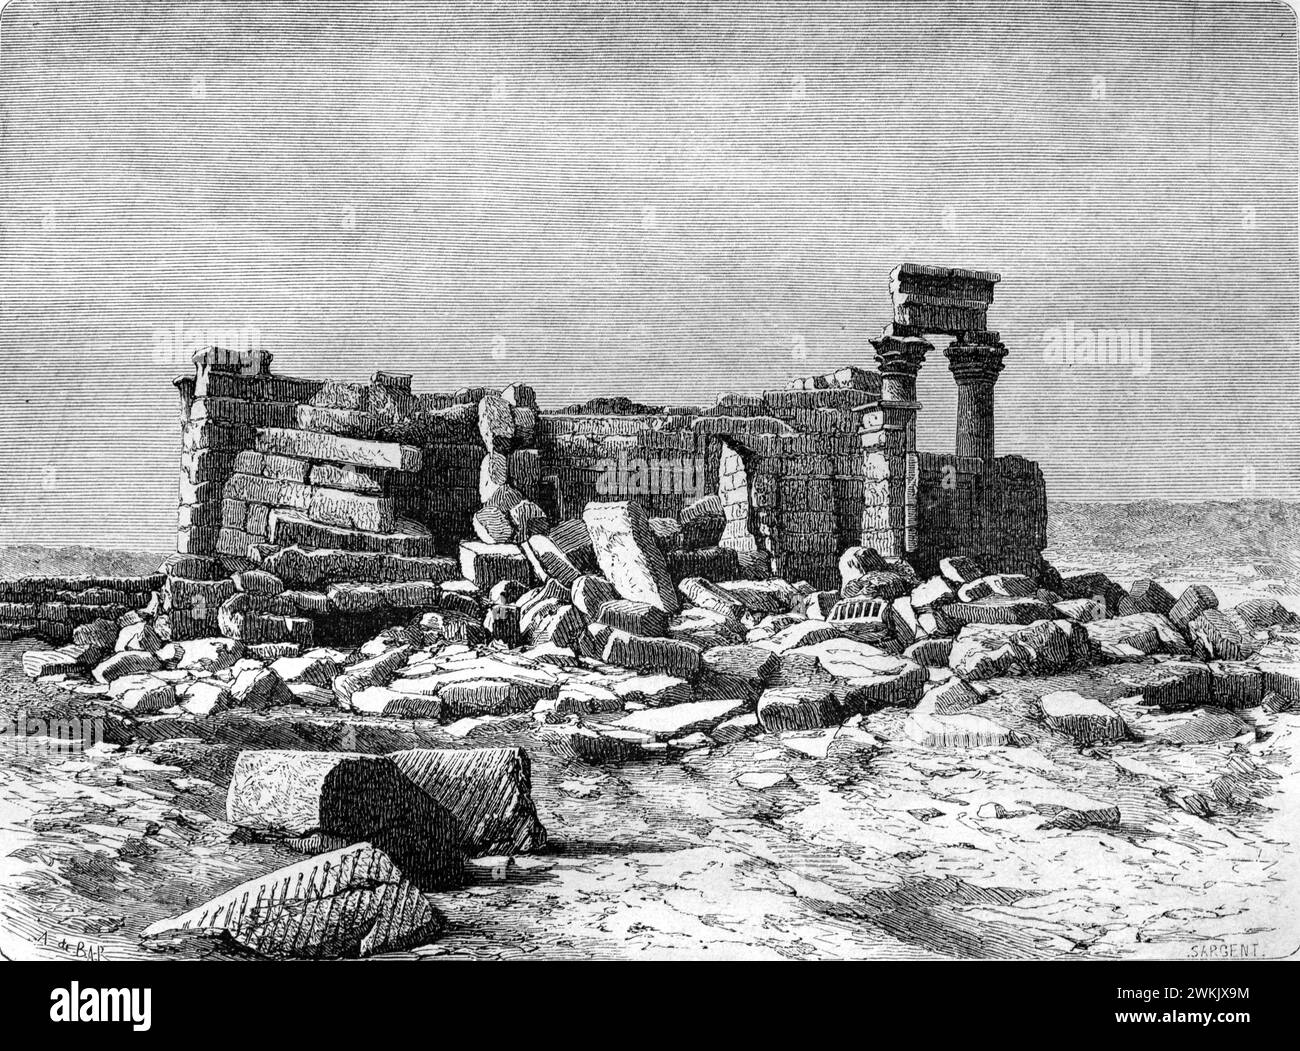 Ruins of the Temple of Debod (200BC) aka the Amun Temple, an Ancient Nubian Temple Nubia Egypt. In 1970-1972 the Temple was Dismantled and Rebuilt in the Parque de la Montana Madrid Spain. Vintage or Historic Engraving or Illustration 1863 Stock Photo